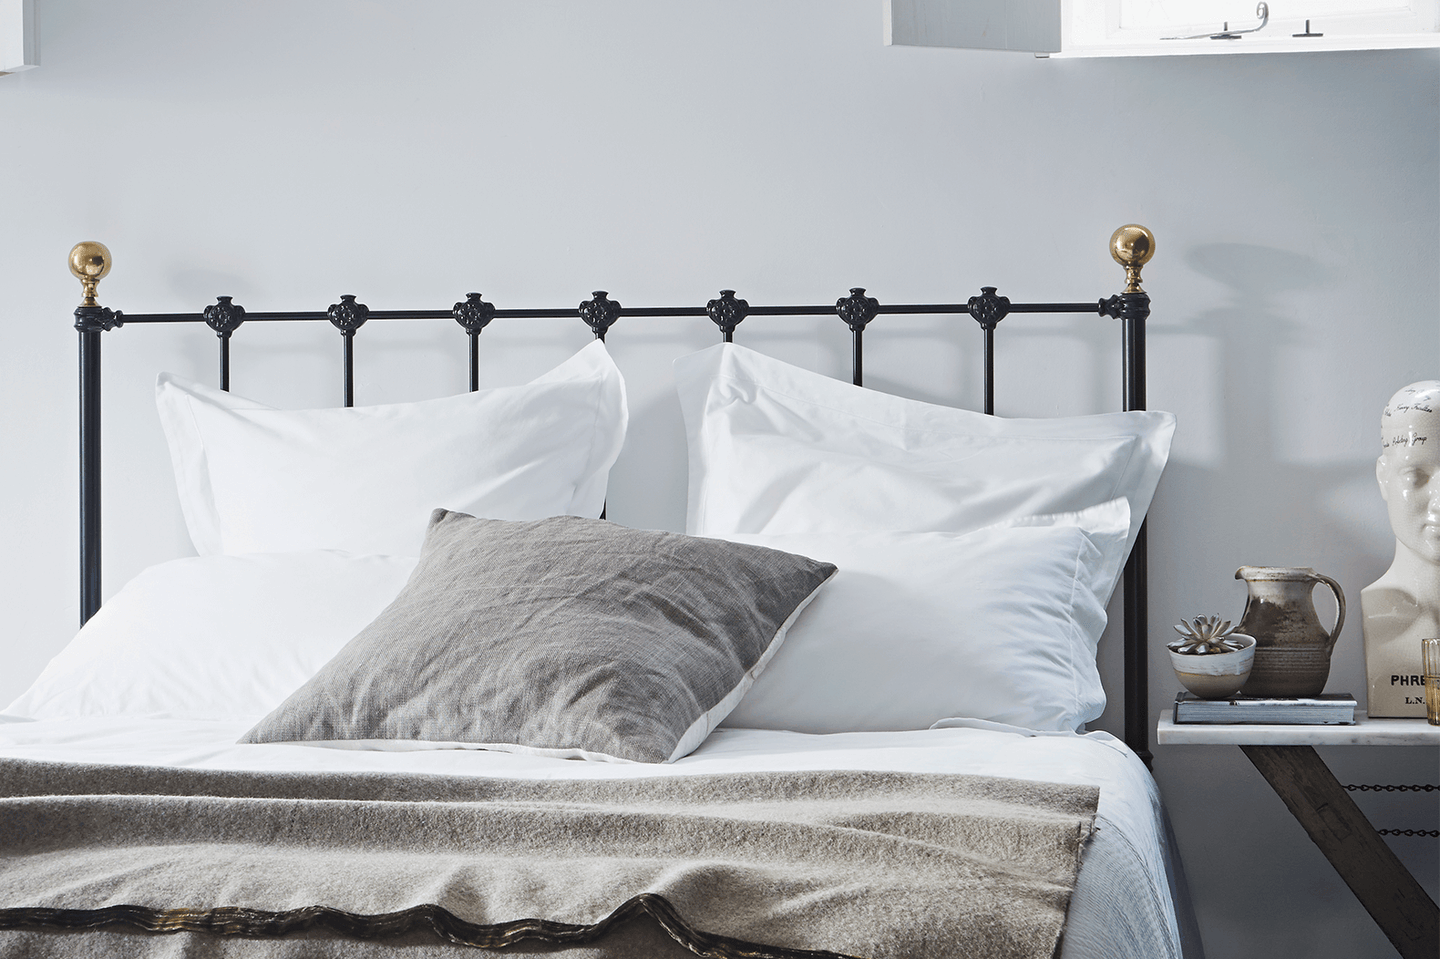 Headboards by The Cornish Bed Company